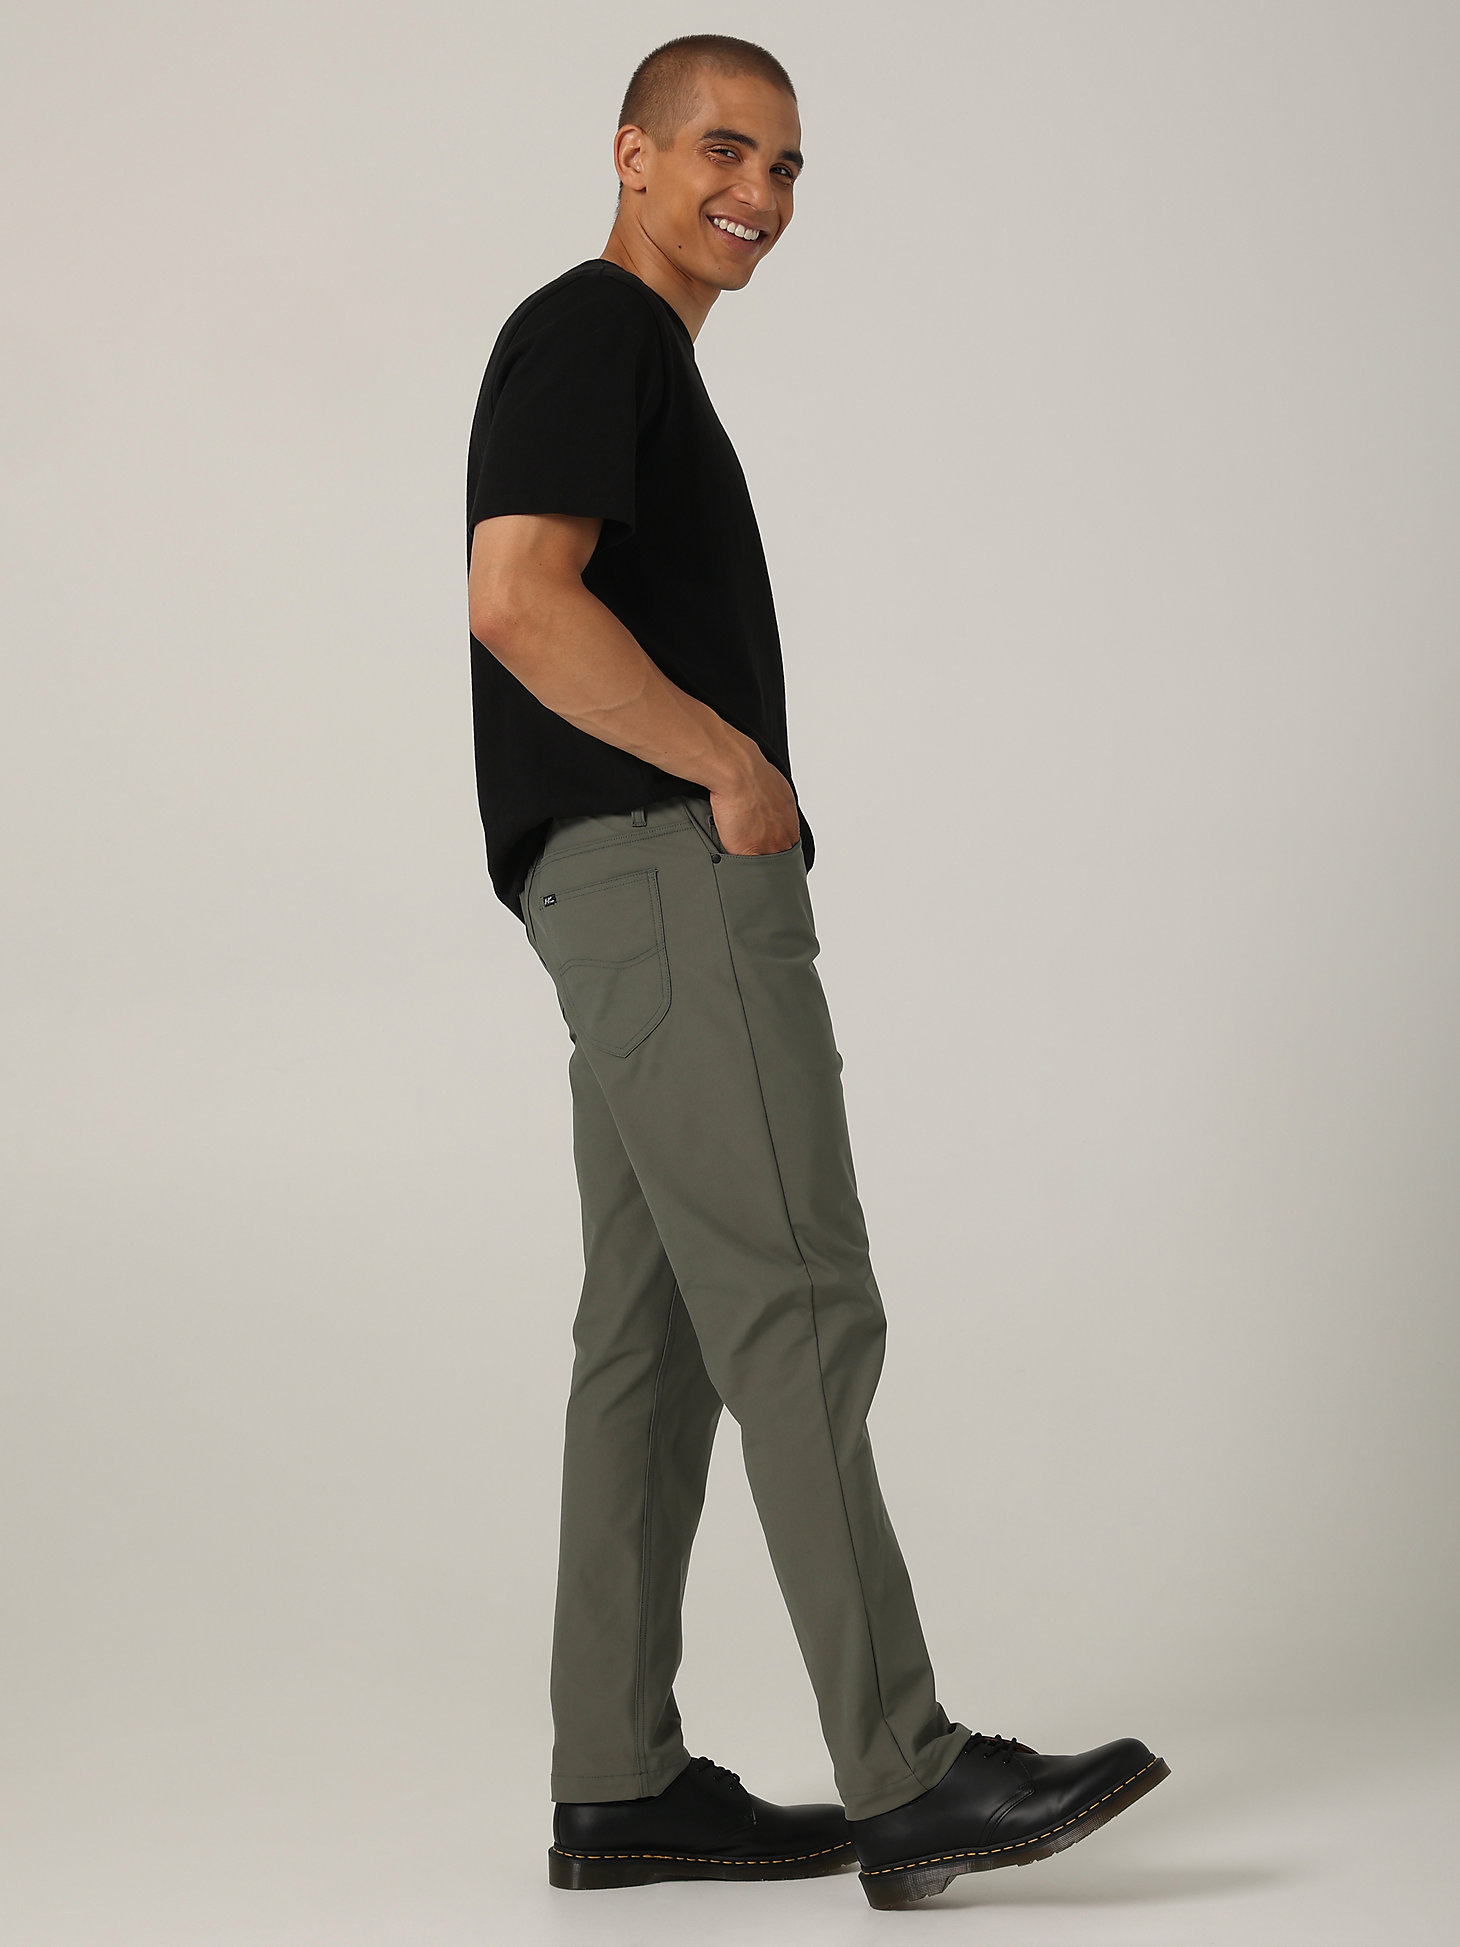 Men’s H.D. Maverick Relaxed Tapered Pant in Fort Green alternative view 2